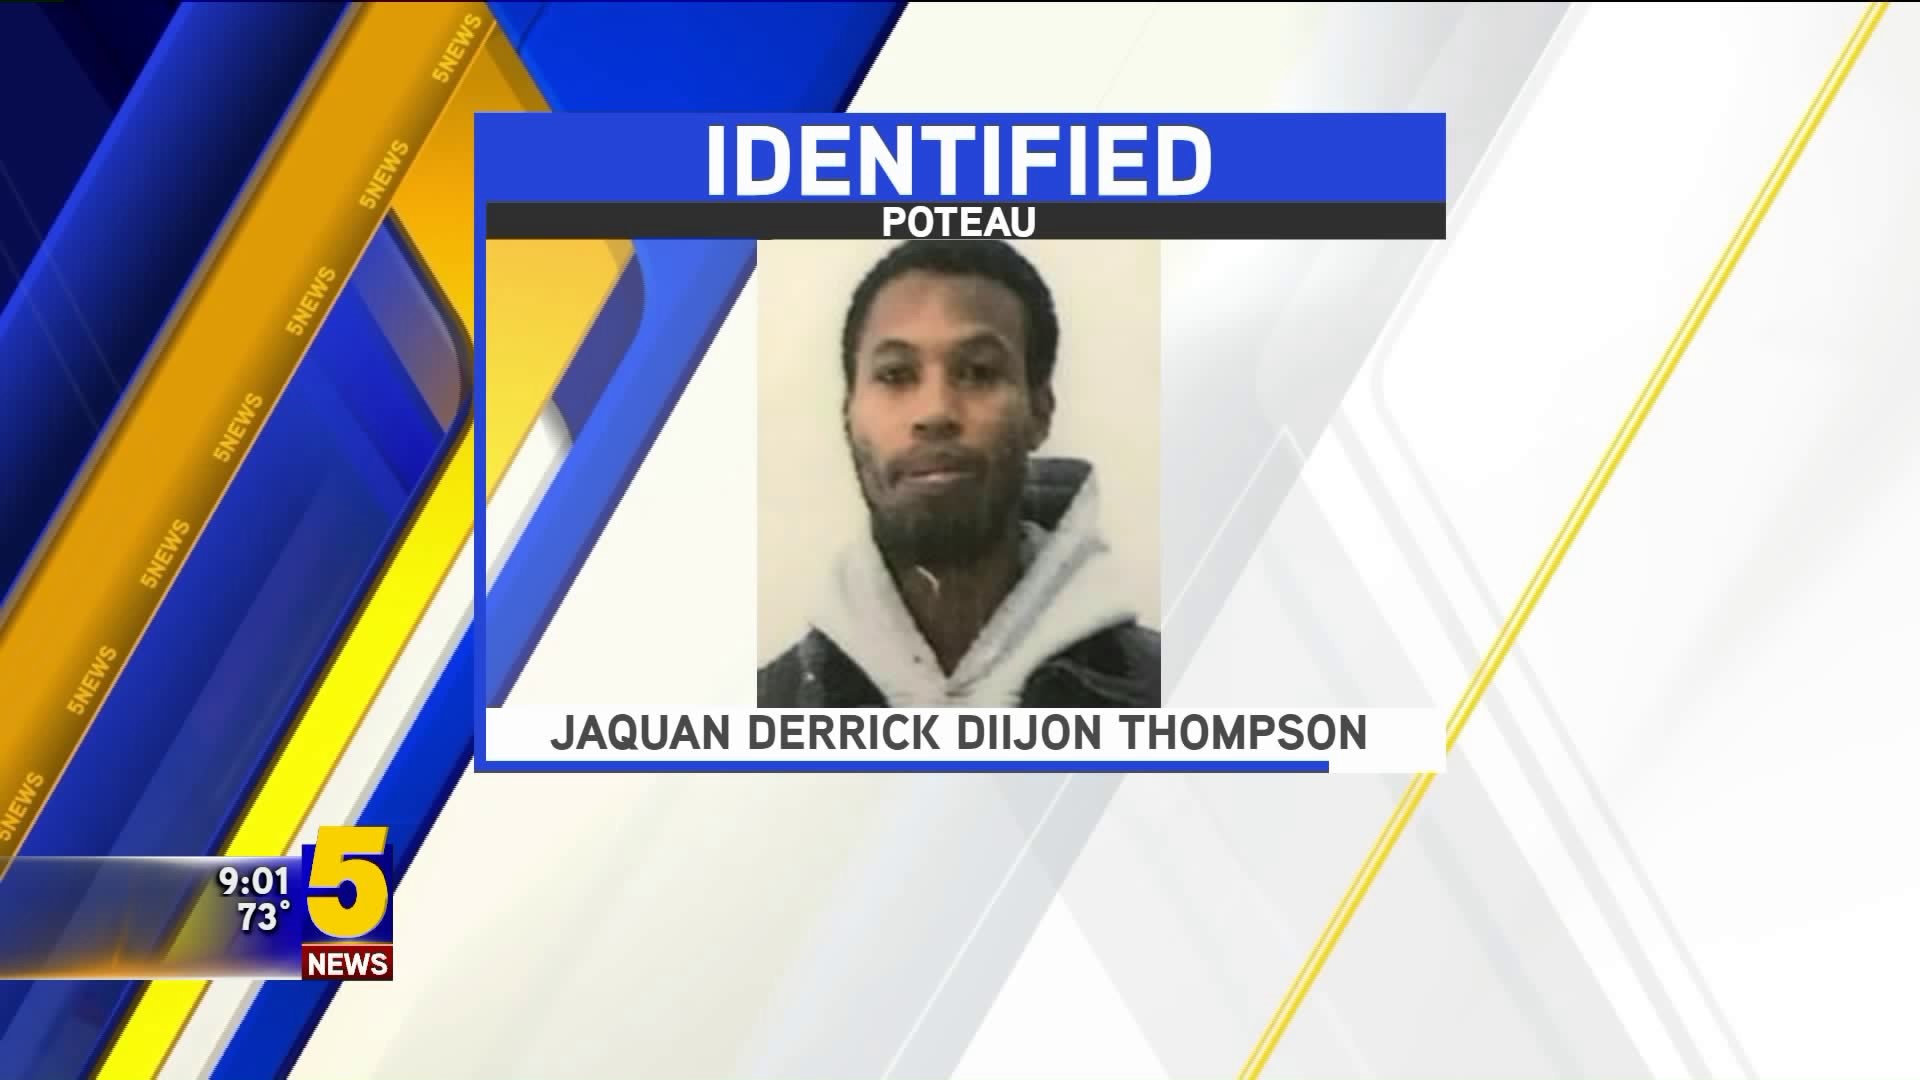 Suspect Identified in Poteau Shooting